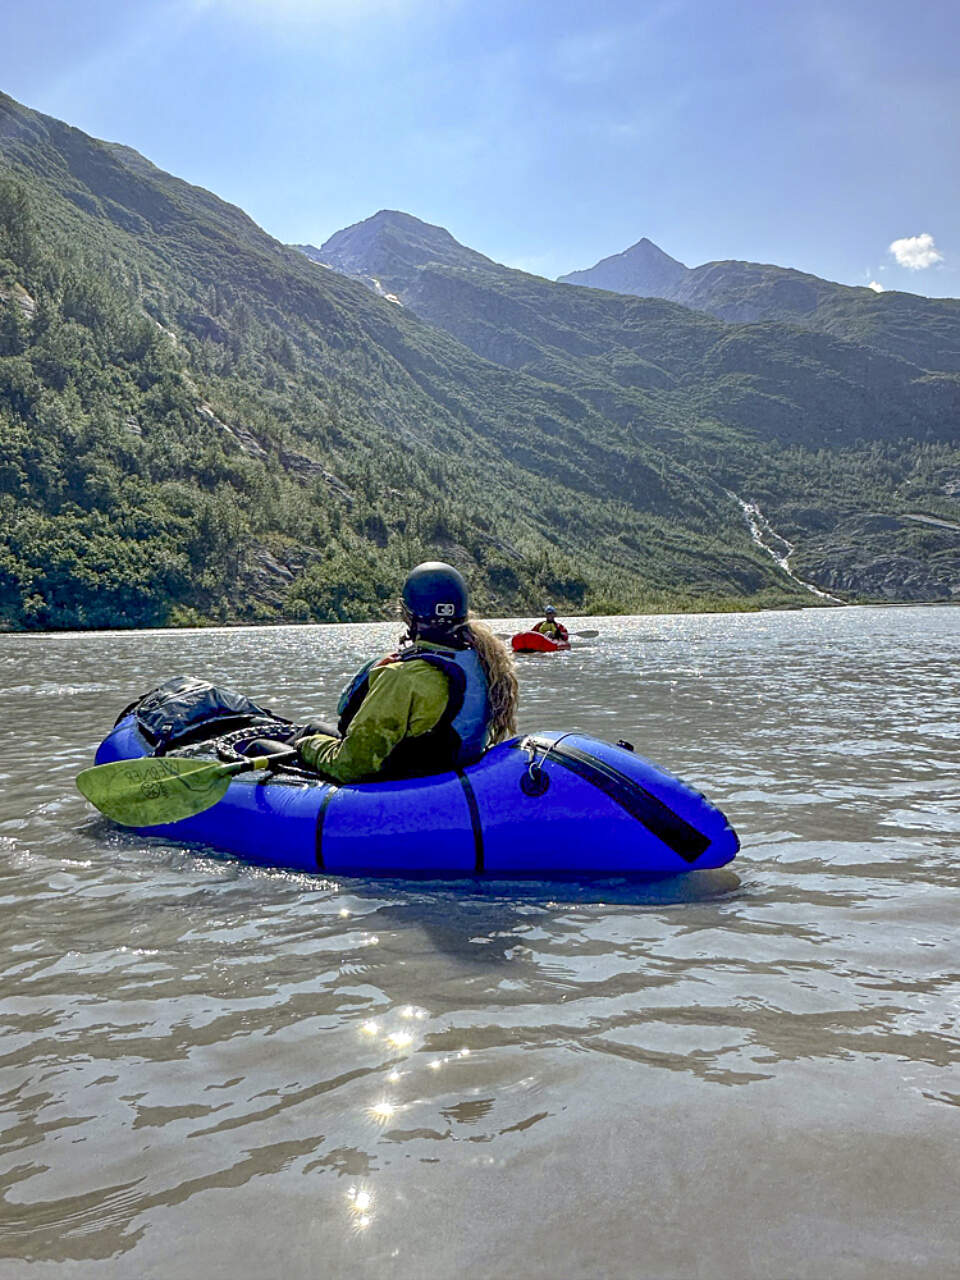 Relax on a half- or full-day packrafting trip with Alaska Helicopter Tours